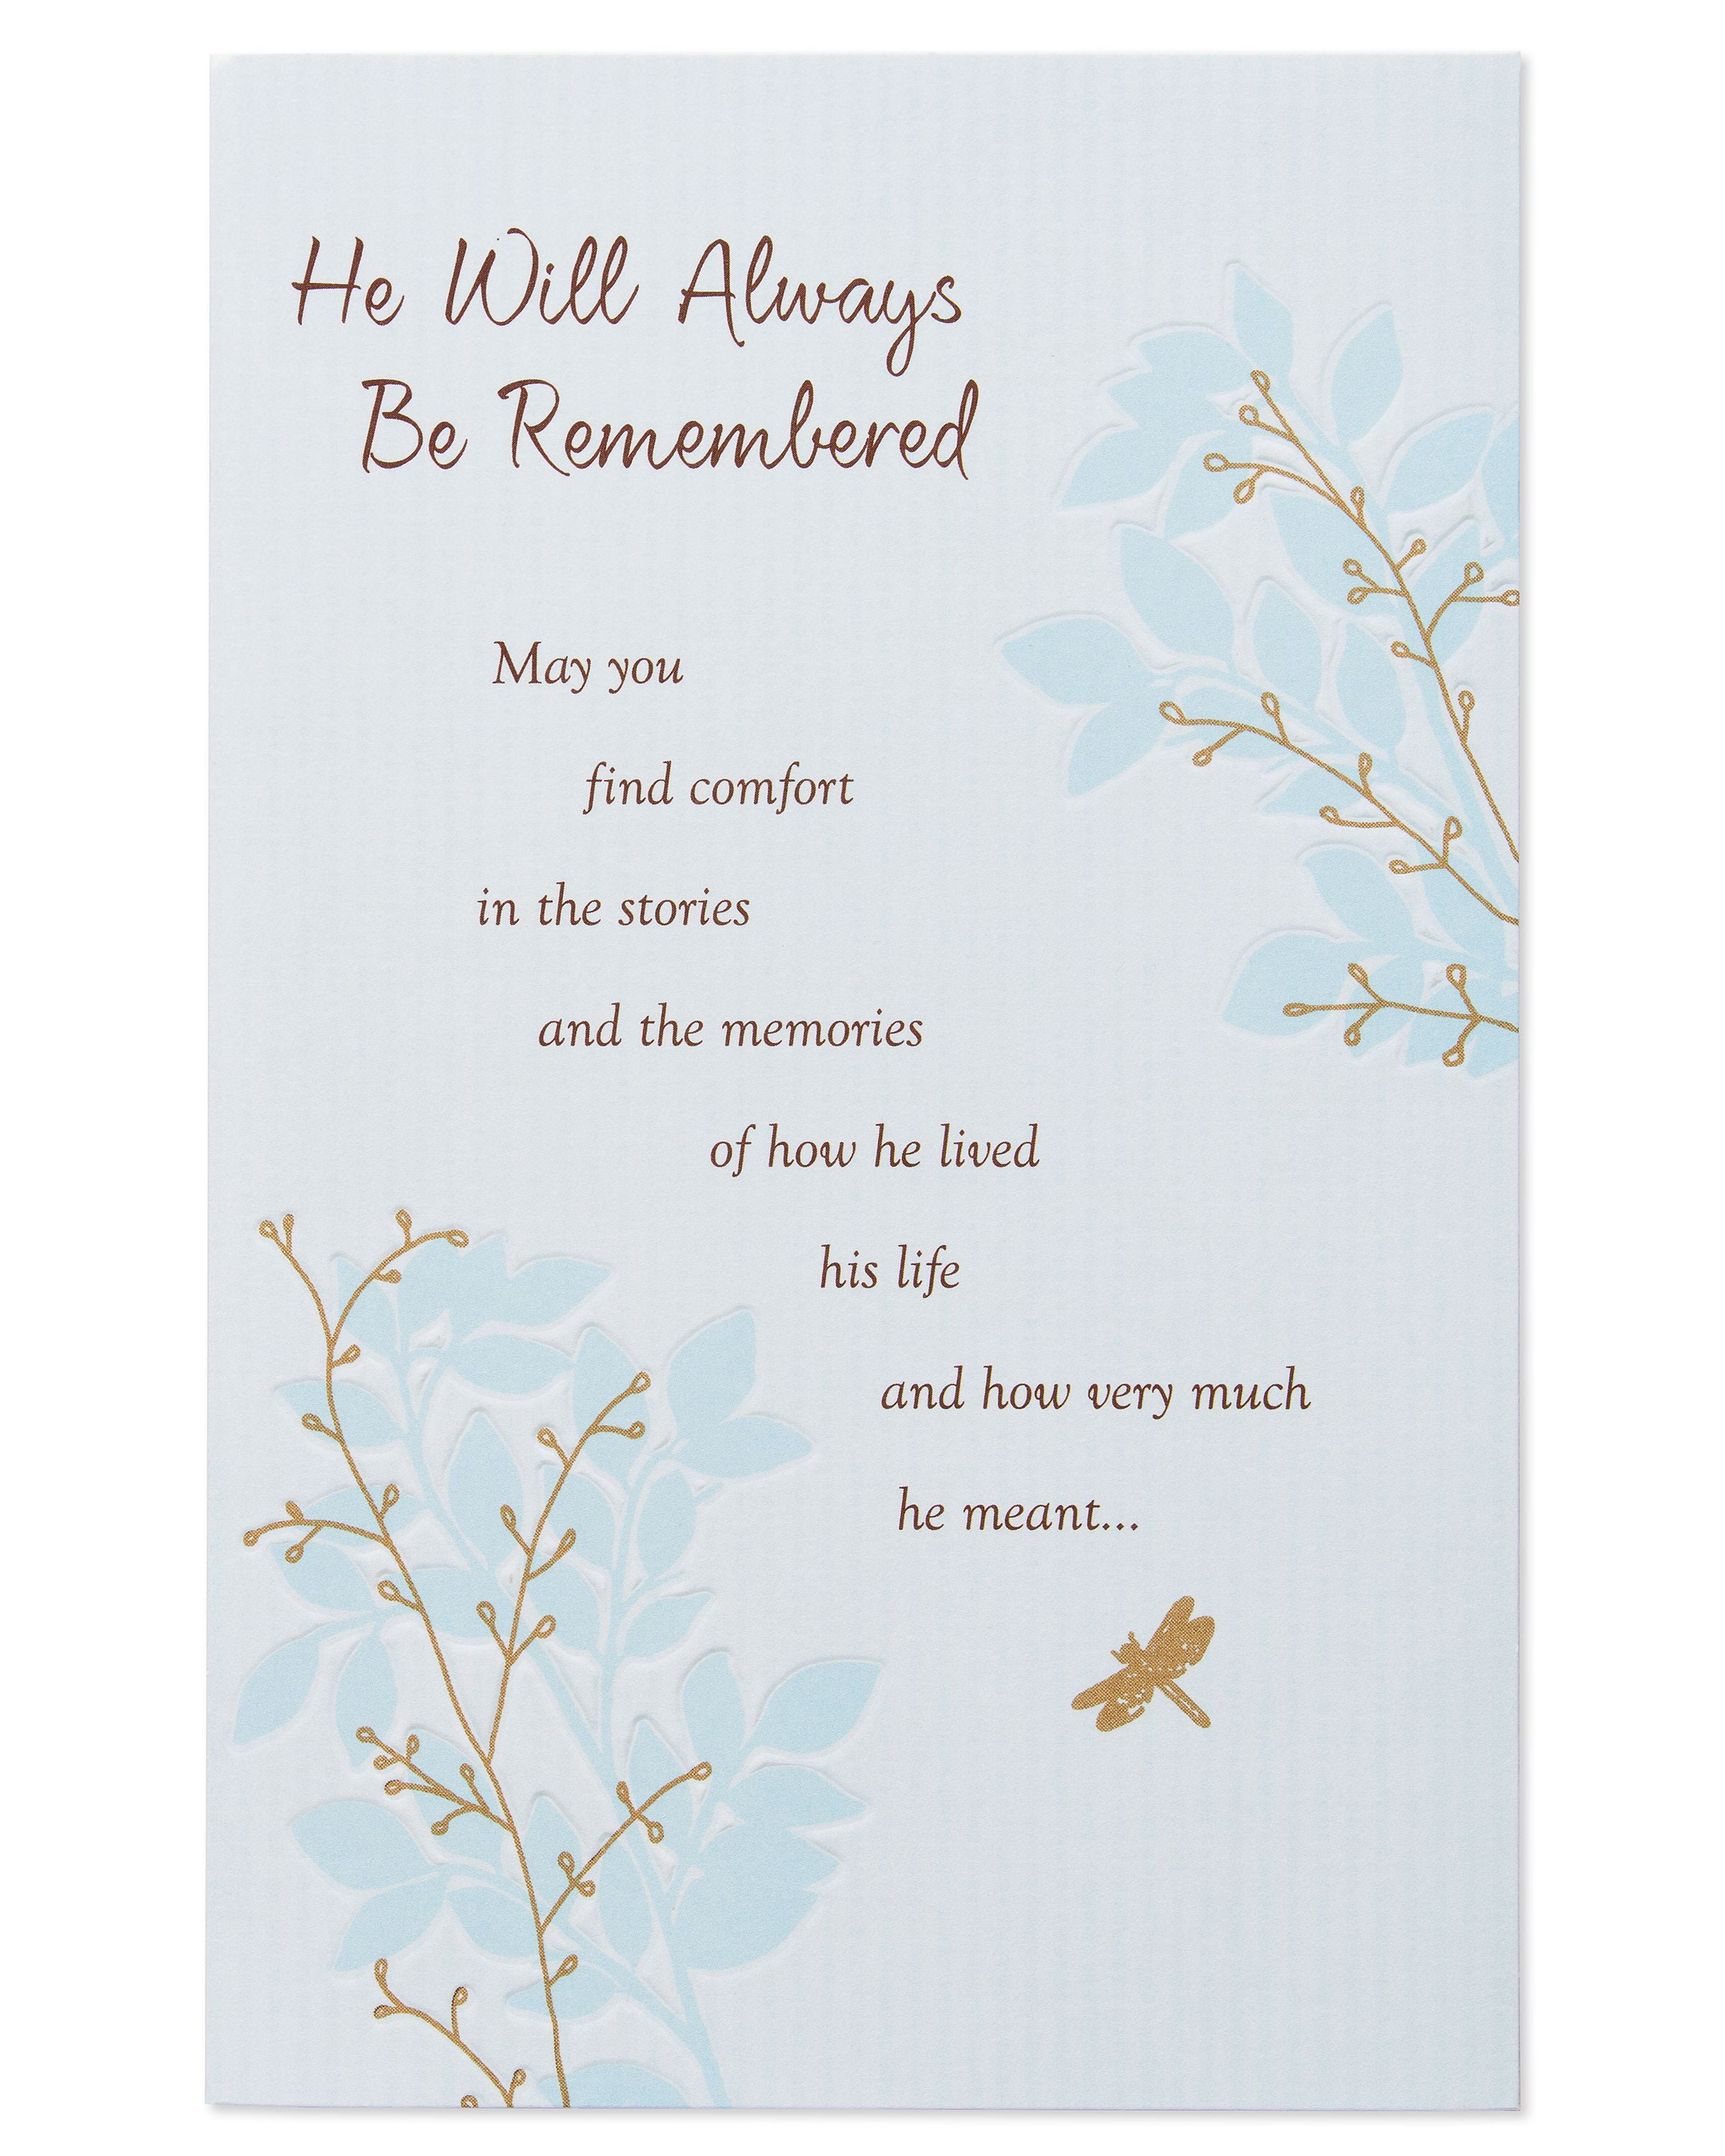 Details about   3 Cards American Greetings Sea Shore Image Special Person with sincere Sympathy